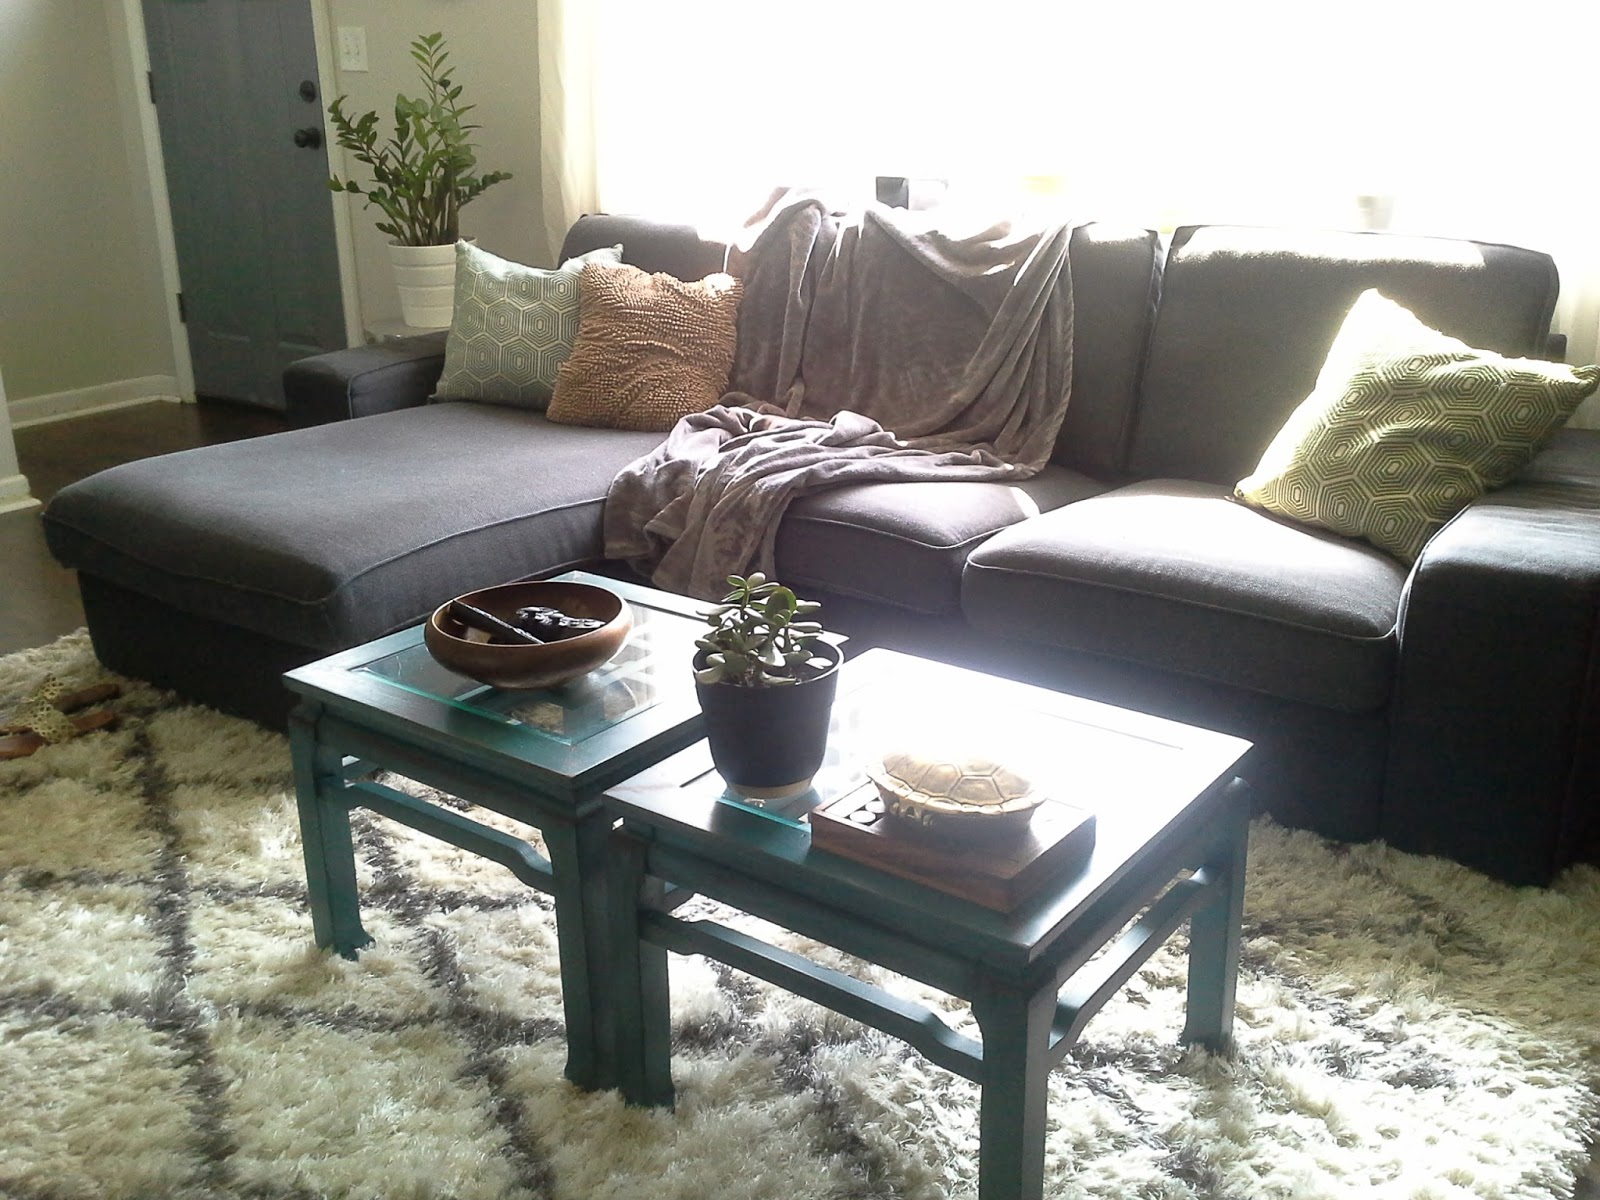 Living Room End Tables